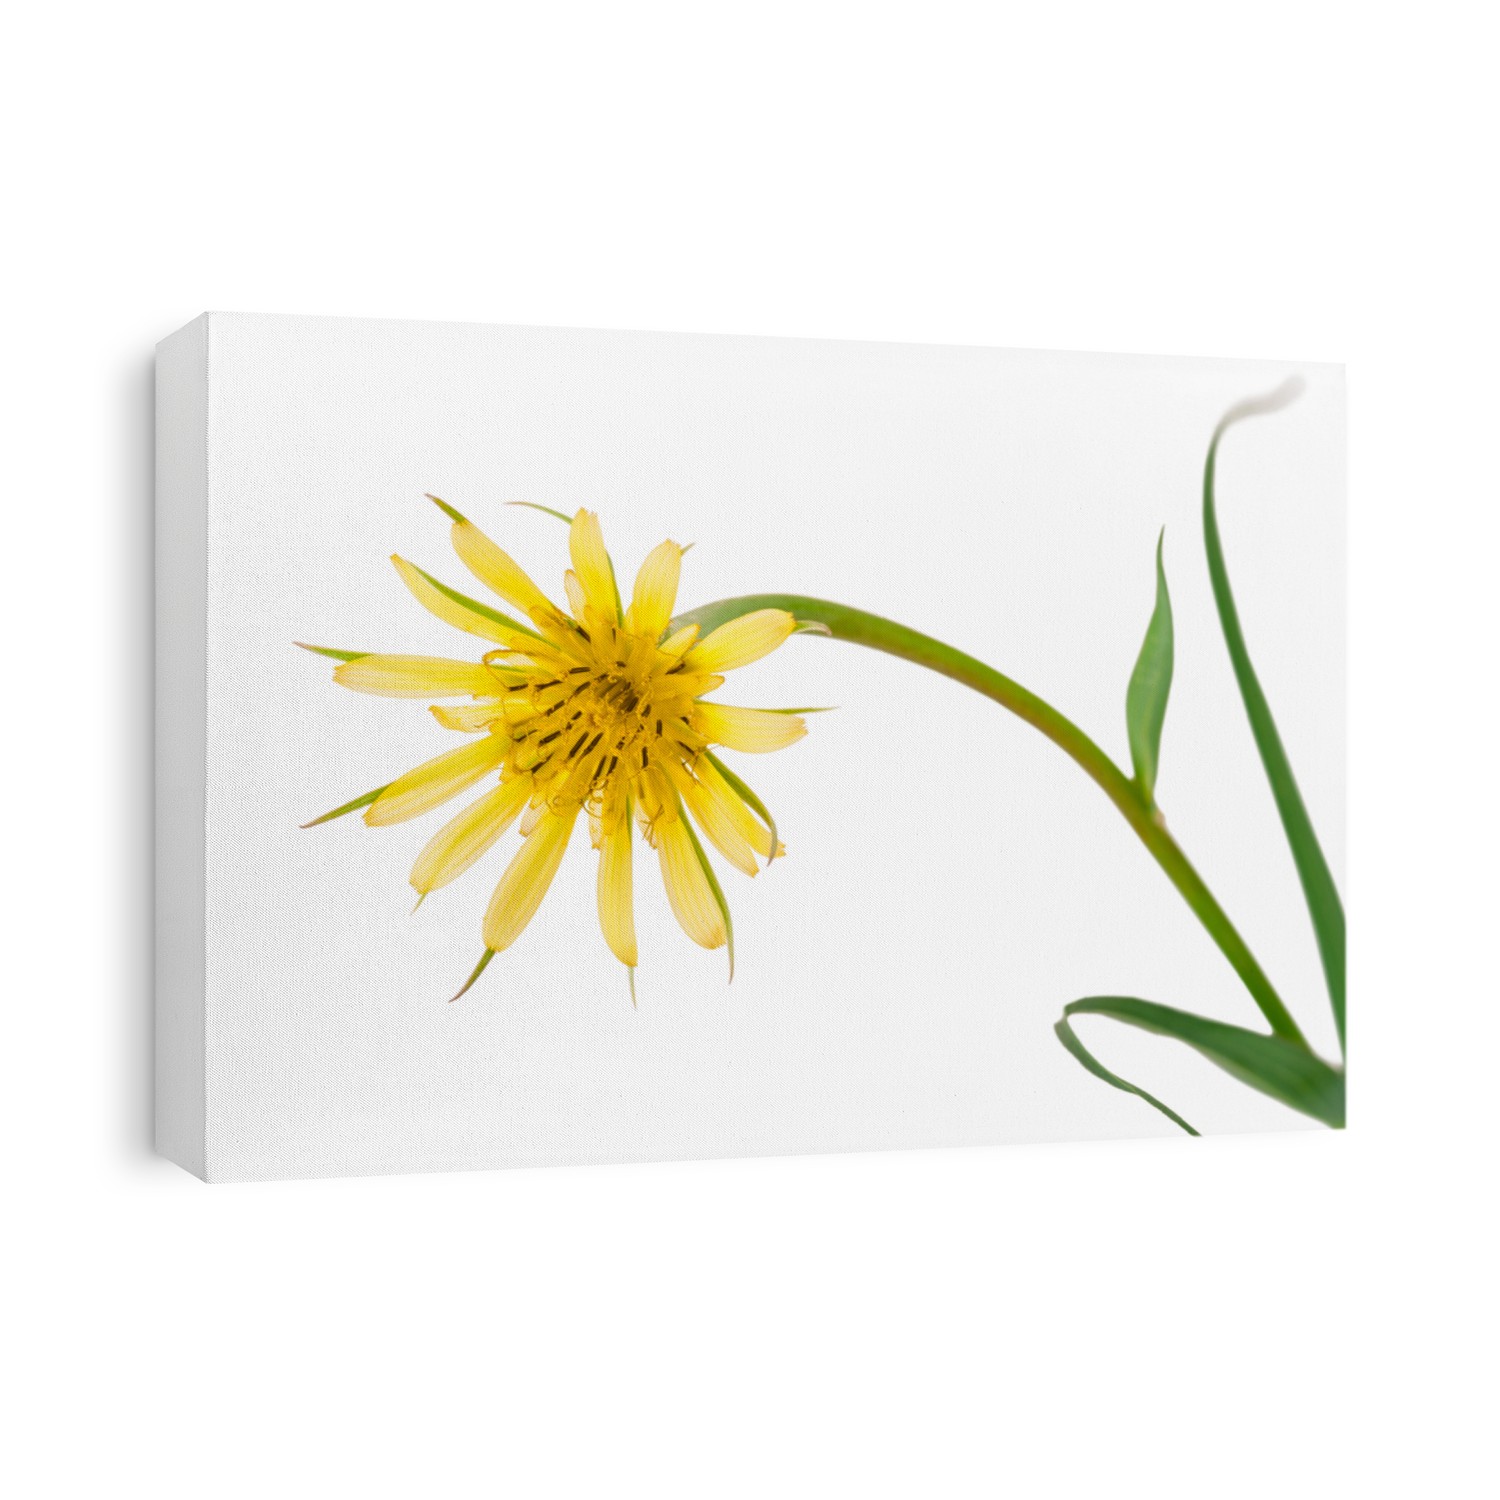 Flowers salsify isolated on white. Tragopogon dubius